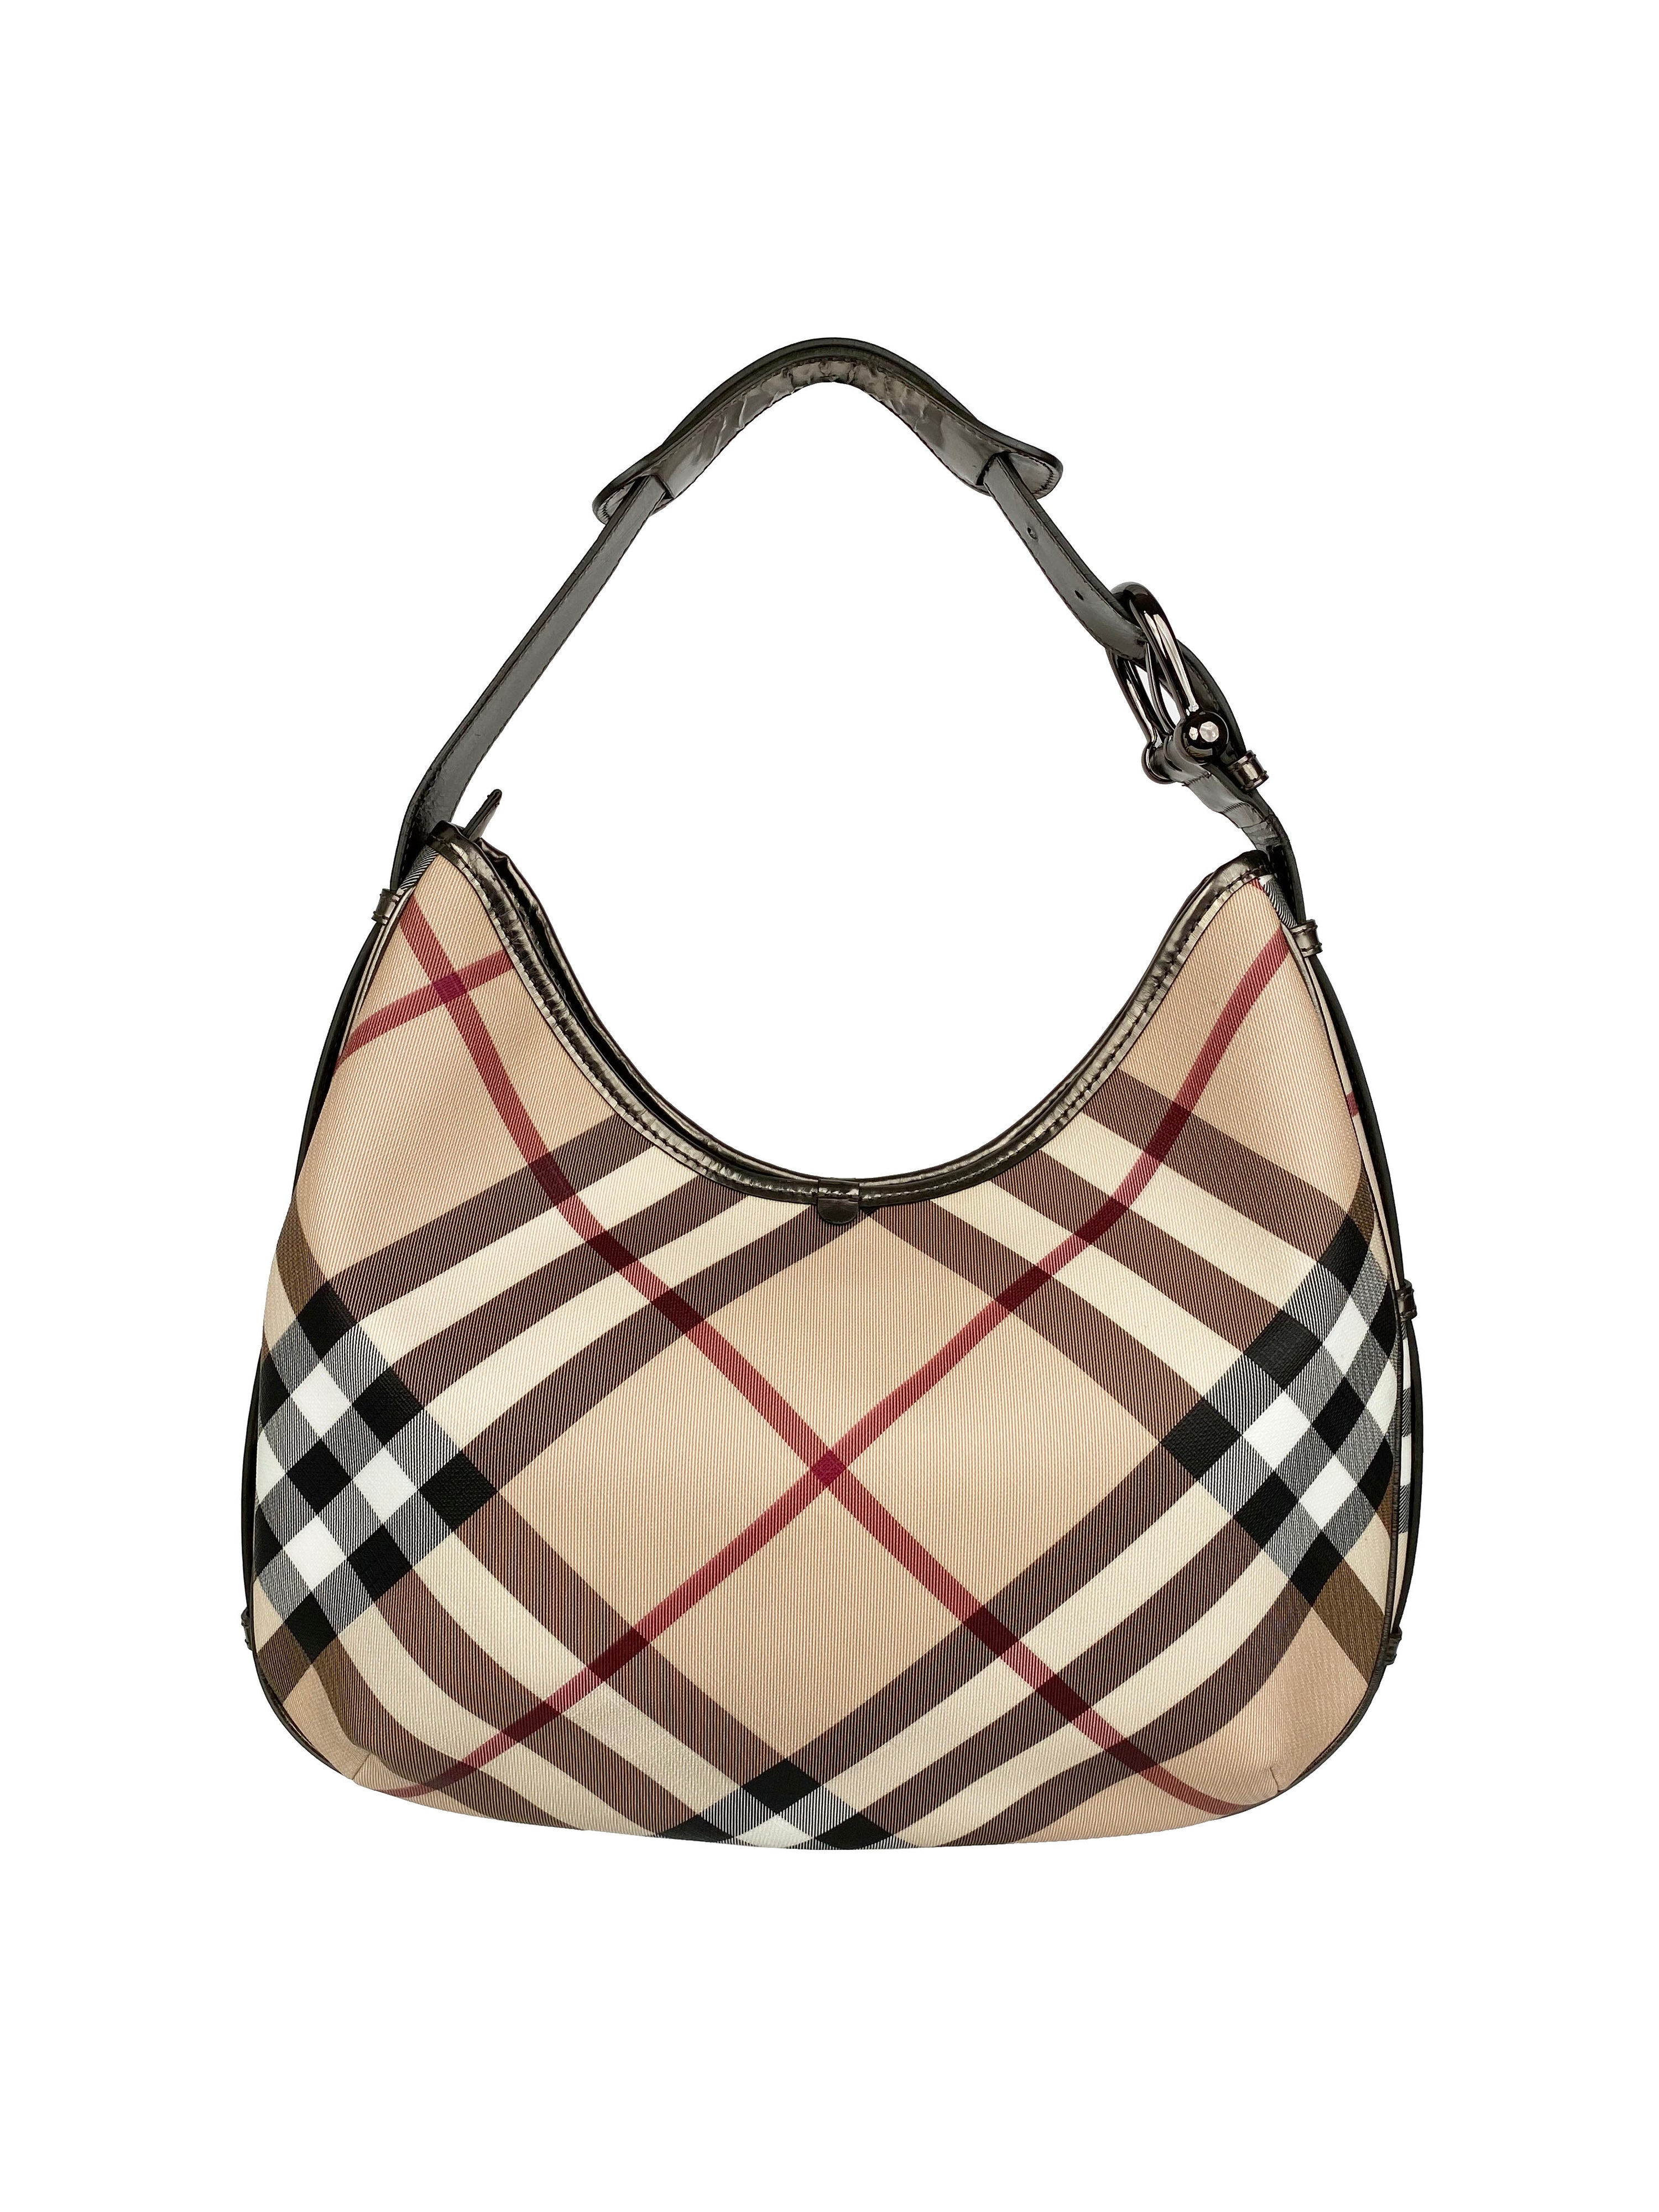 Burberry Large Haymarket Check Tote